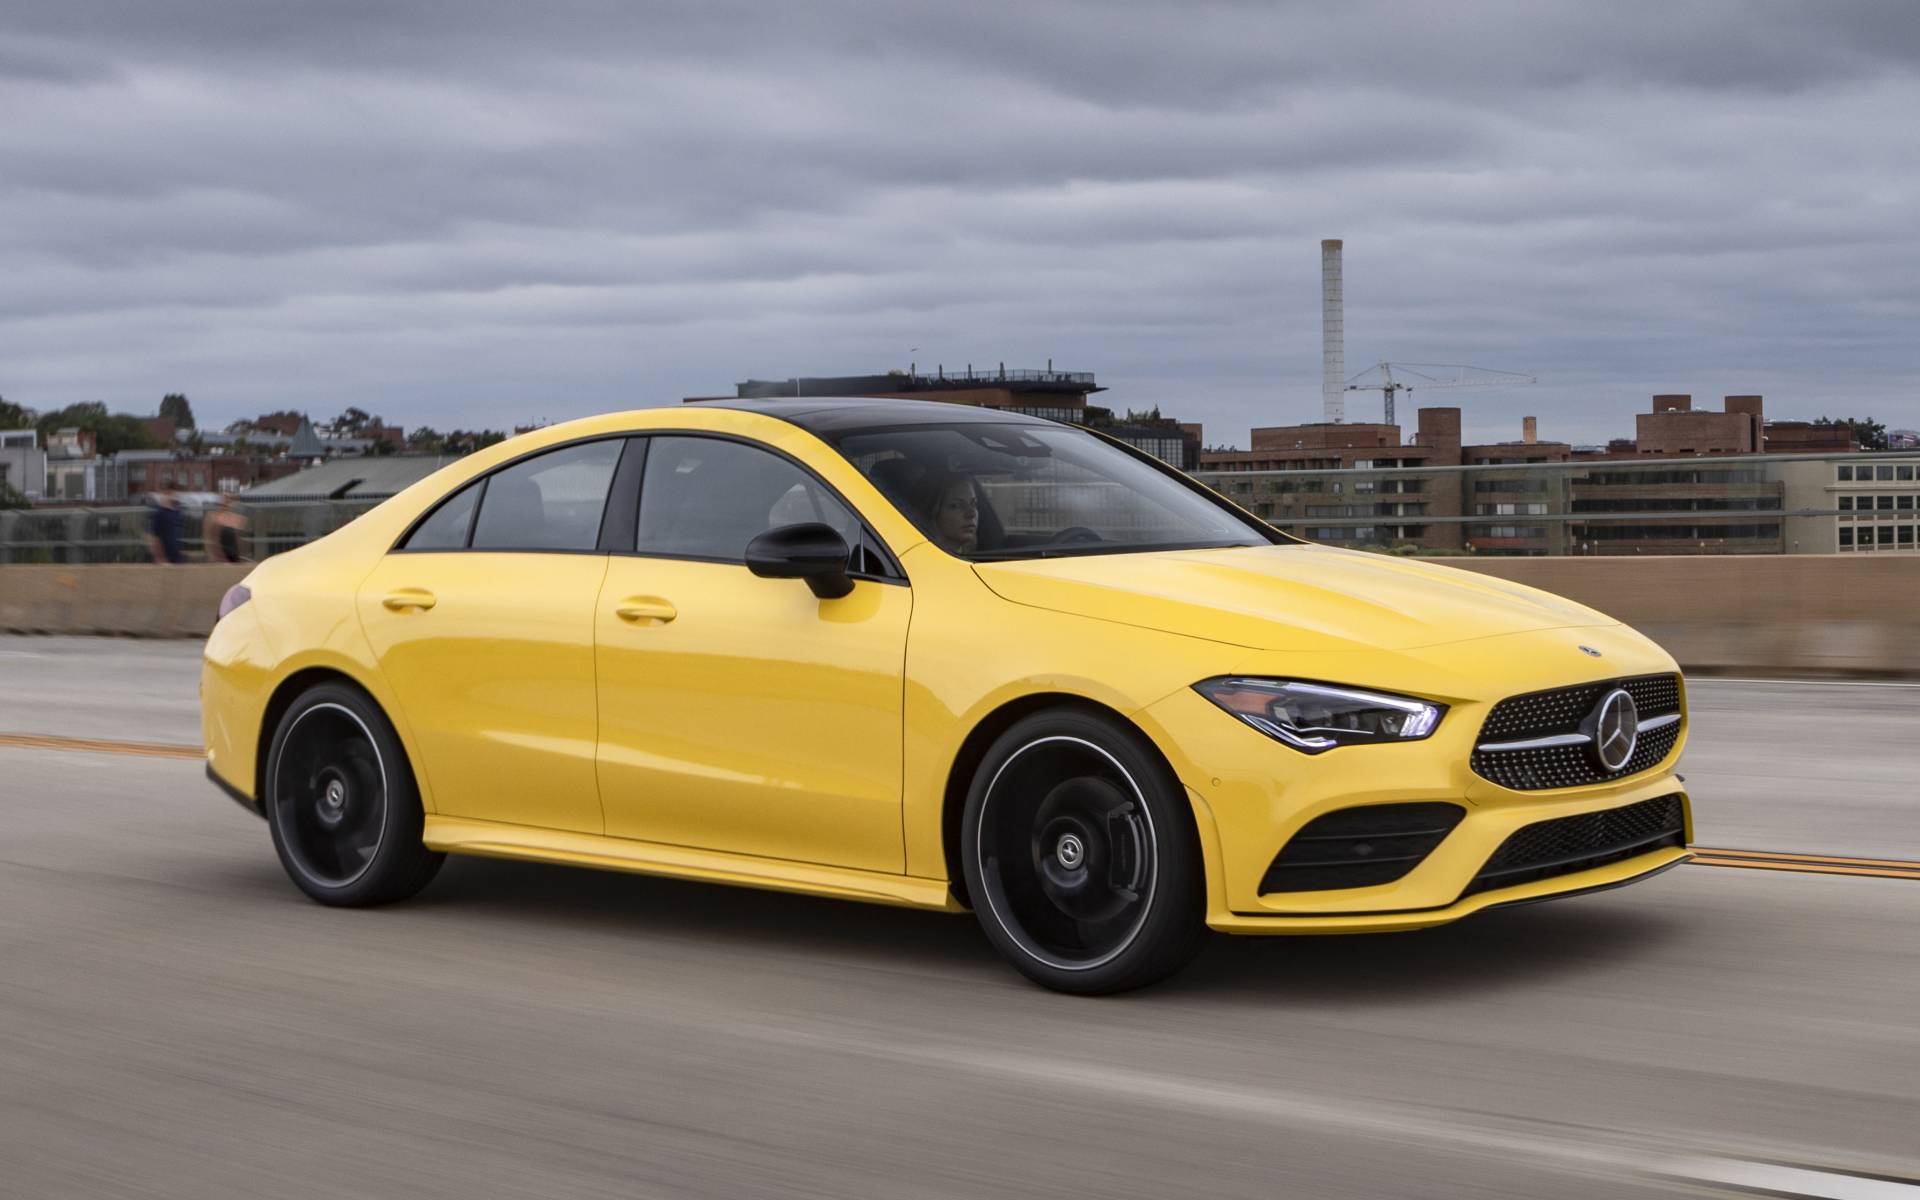 2020 Mercedes-Benz CLA - News, reviews, picture galleries and